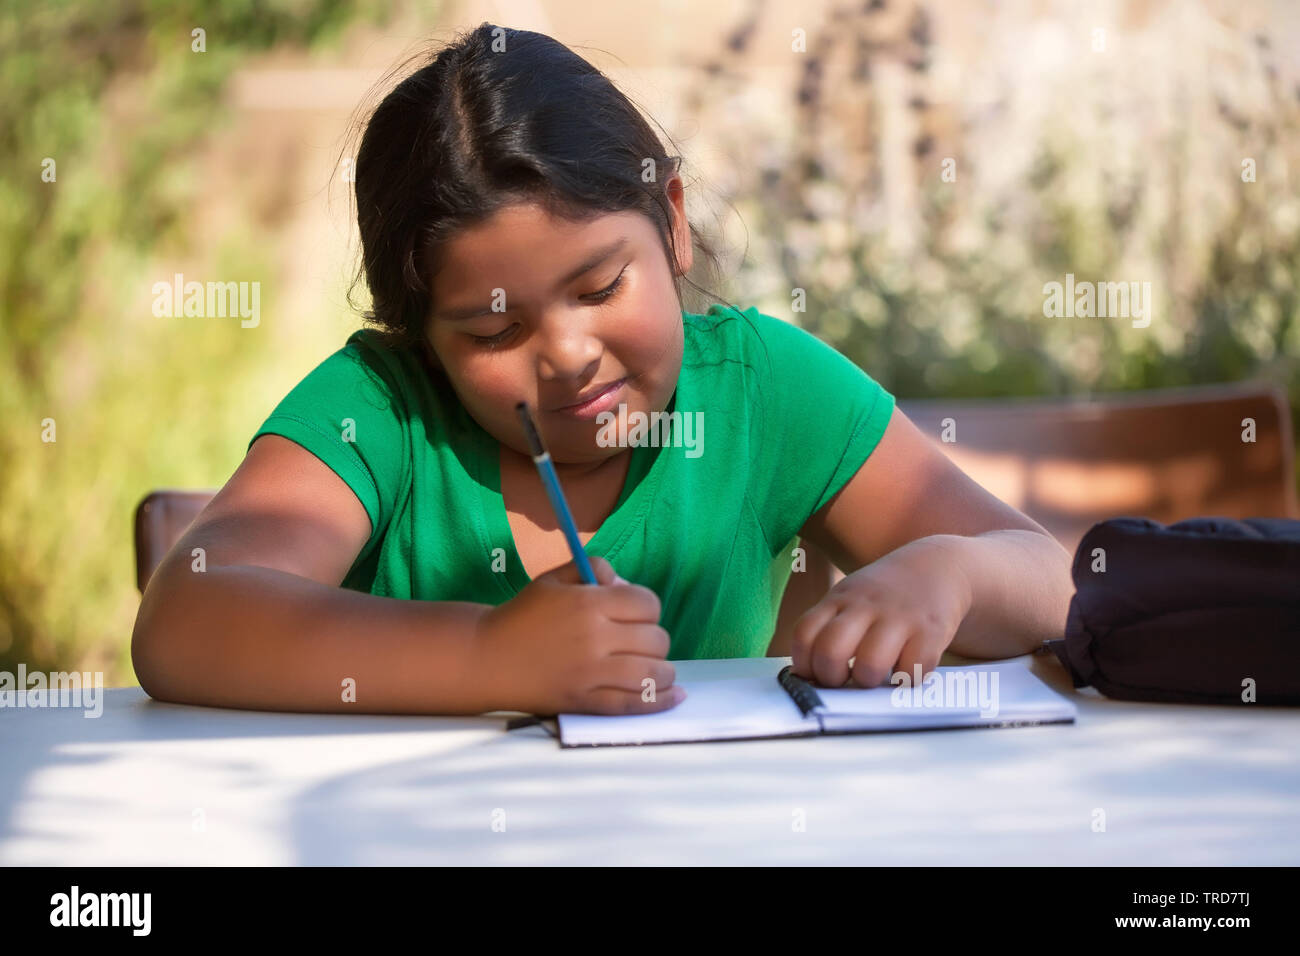 Smart elementary student using imagination to sketch ideas on notebook in an outdoor setting while the sun is setting. Stock Photo